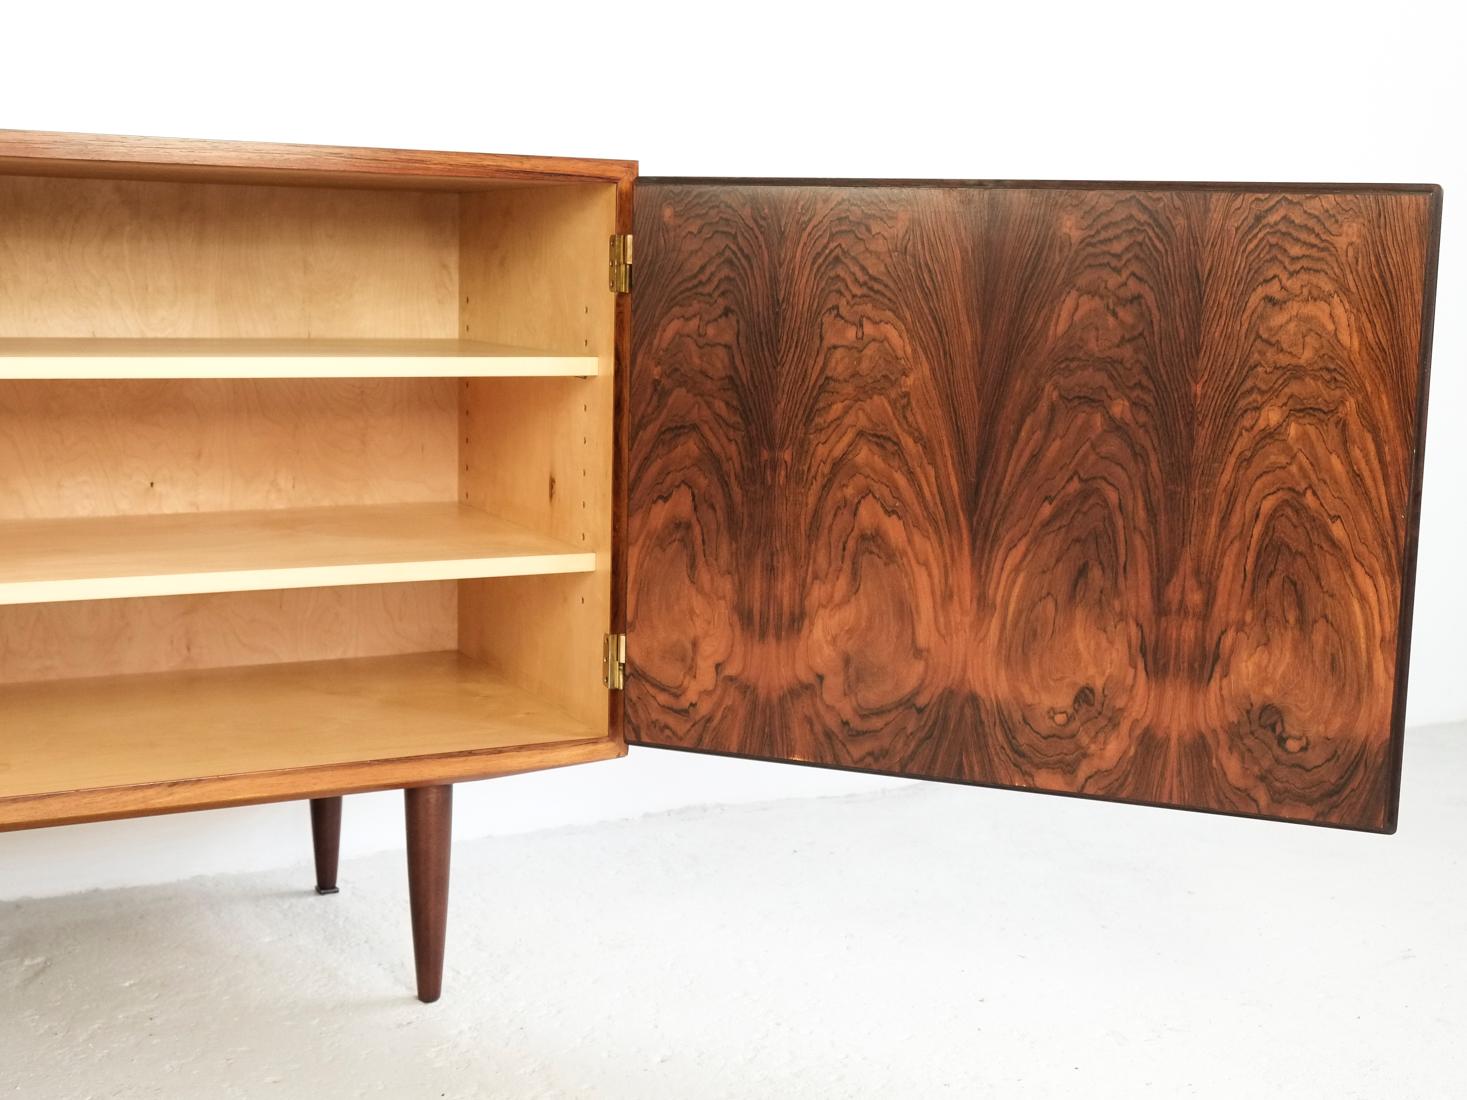 20th Century Midcentury Danish Sideboard with 2 Doors in Rosewood by Hundevad 1960s For Sale